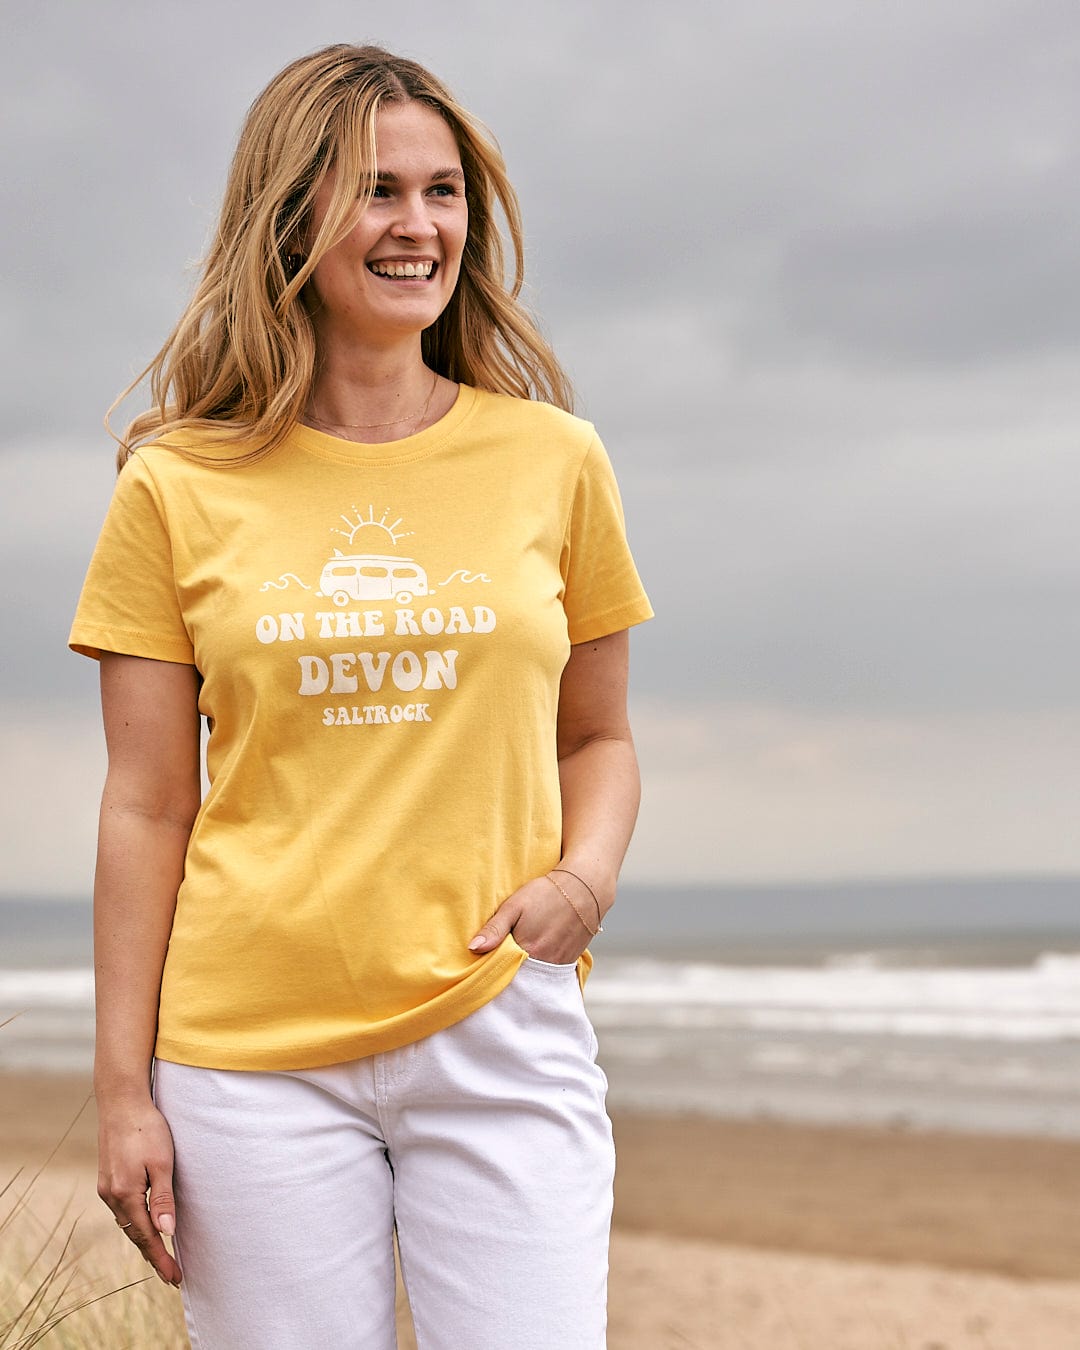 A woman wearing a Saltrock On The Road Devon - Womens Short Sleeve T-Shirt - Yellow standing on the beach.